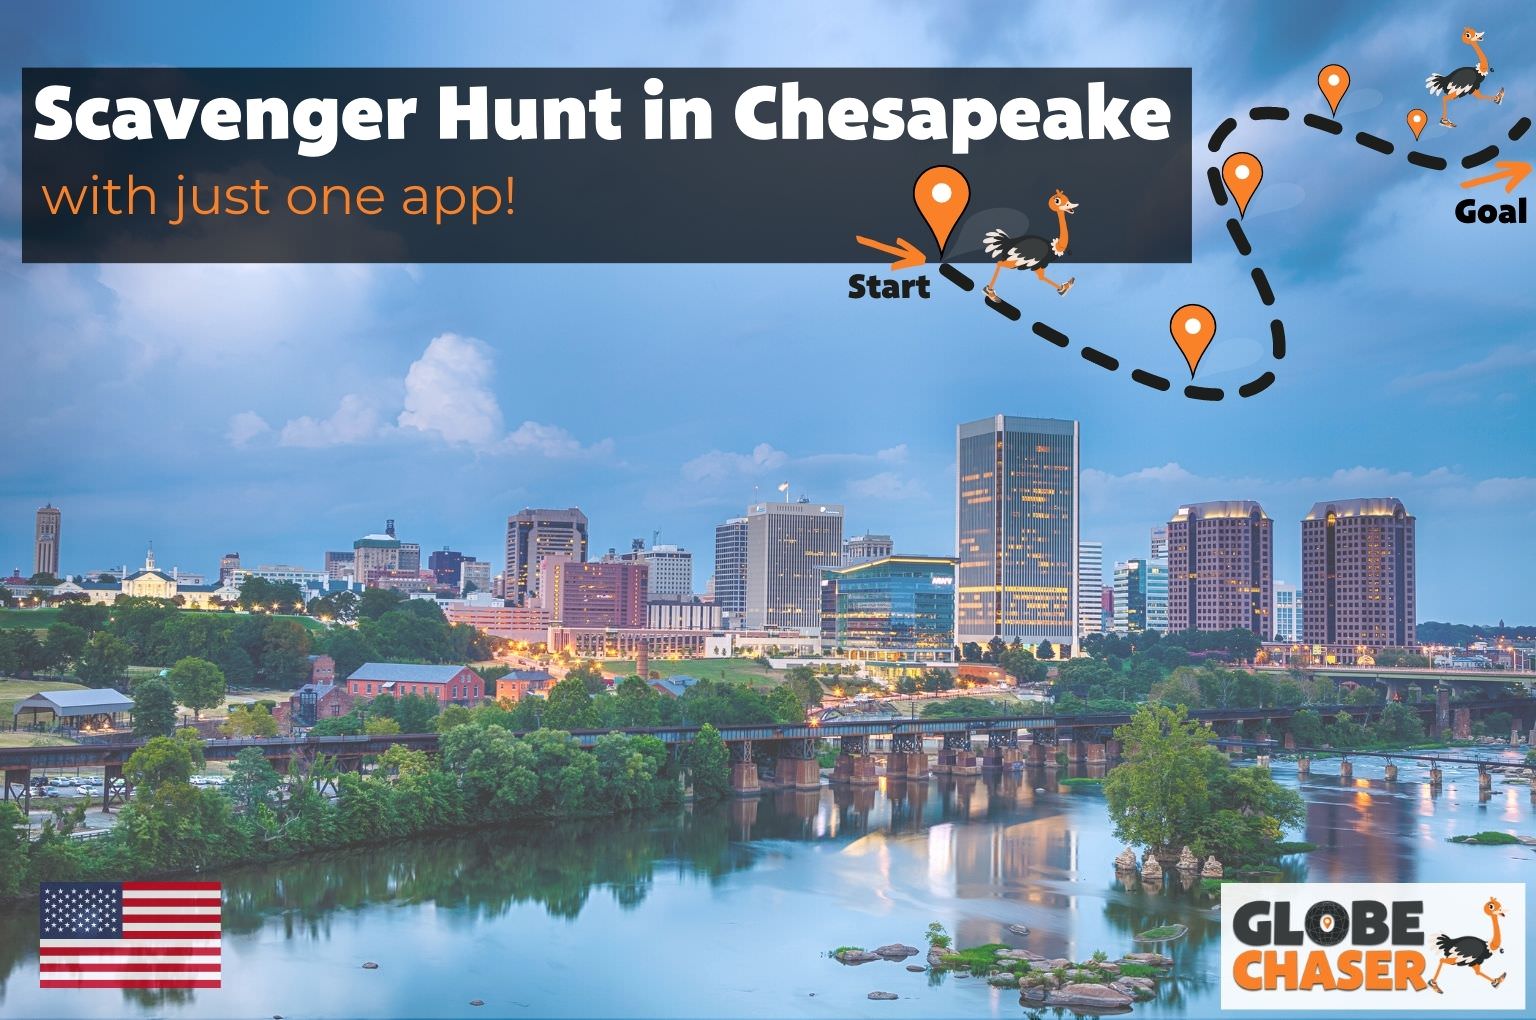 Scavenger Hunt in Chesapeake, USA - Family Activities with the Globe Chaser App for Outdoor Fun